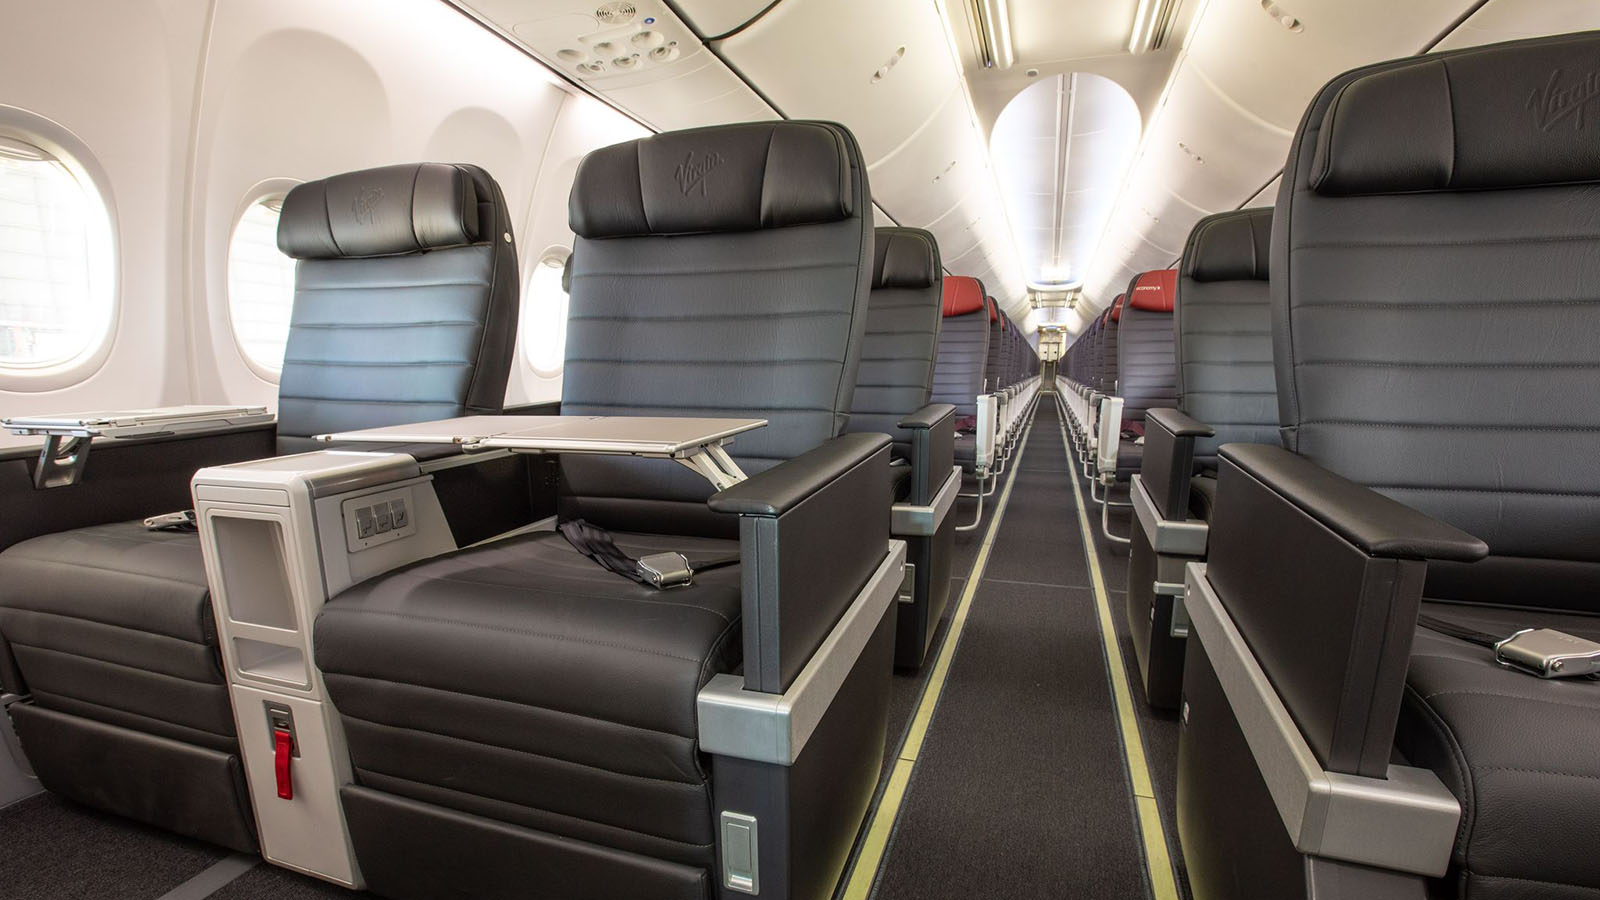 Seating in Business Class on Virgin Australia's Boeing 737